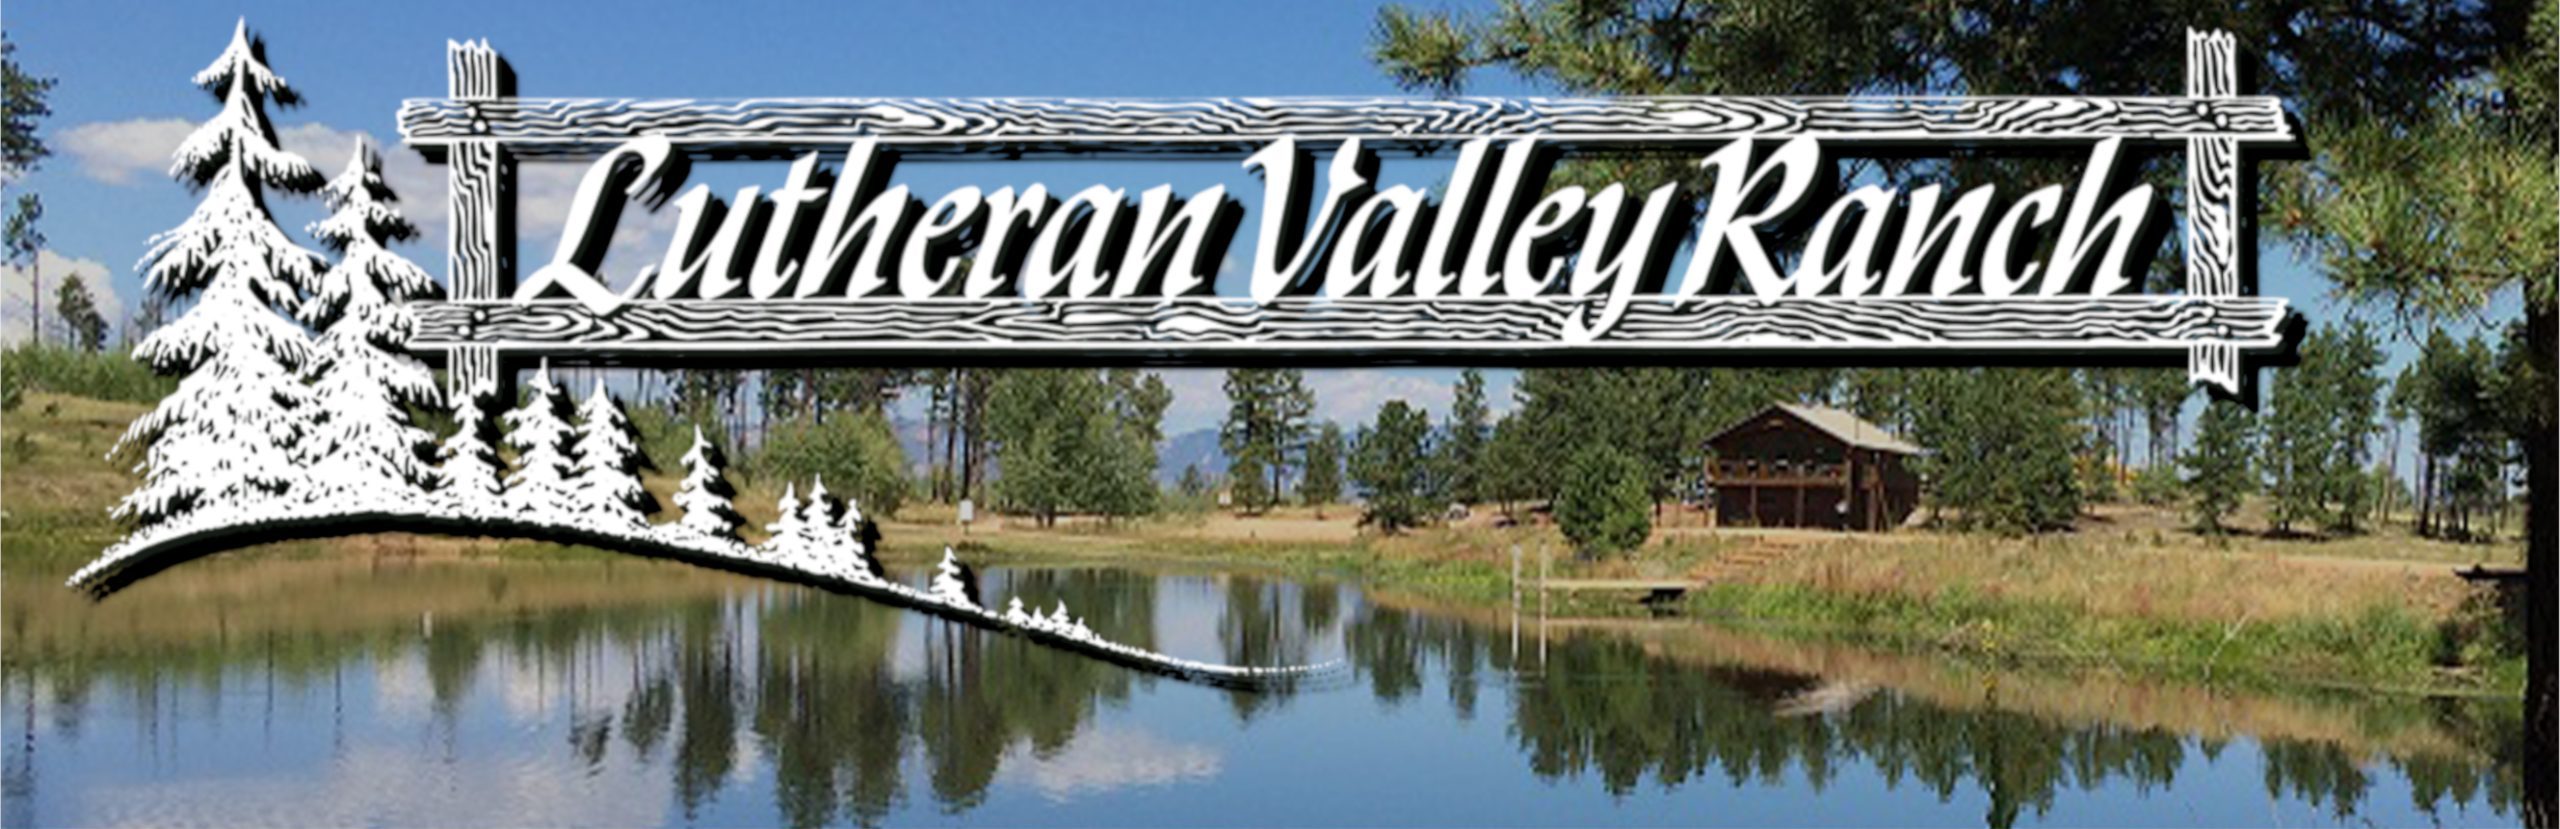 Lutheran Valley Ranch